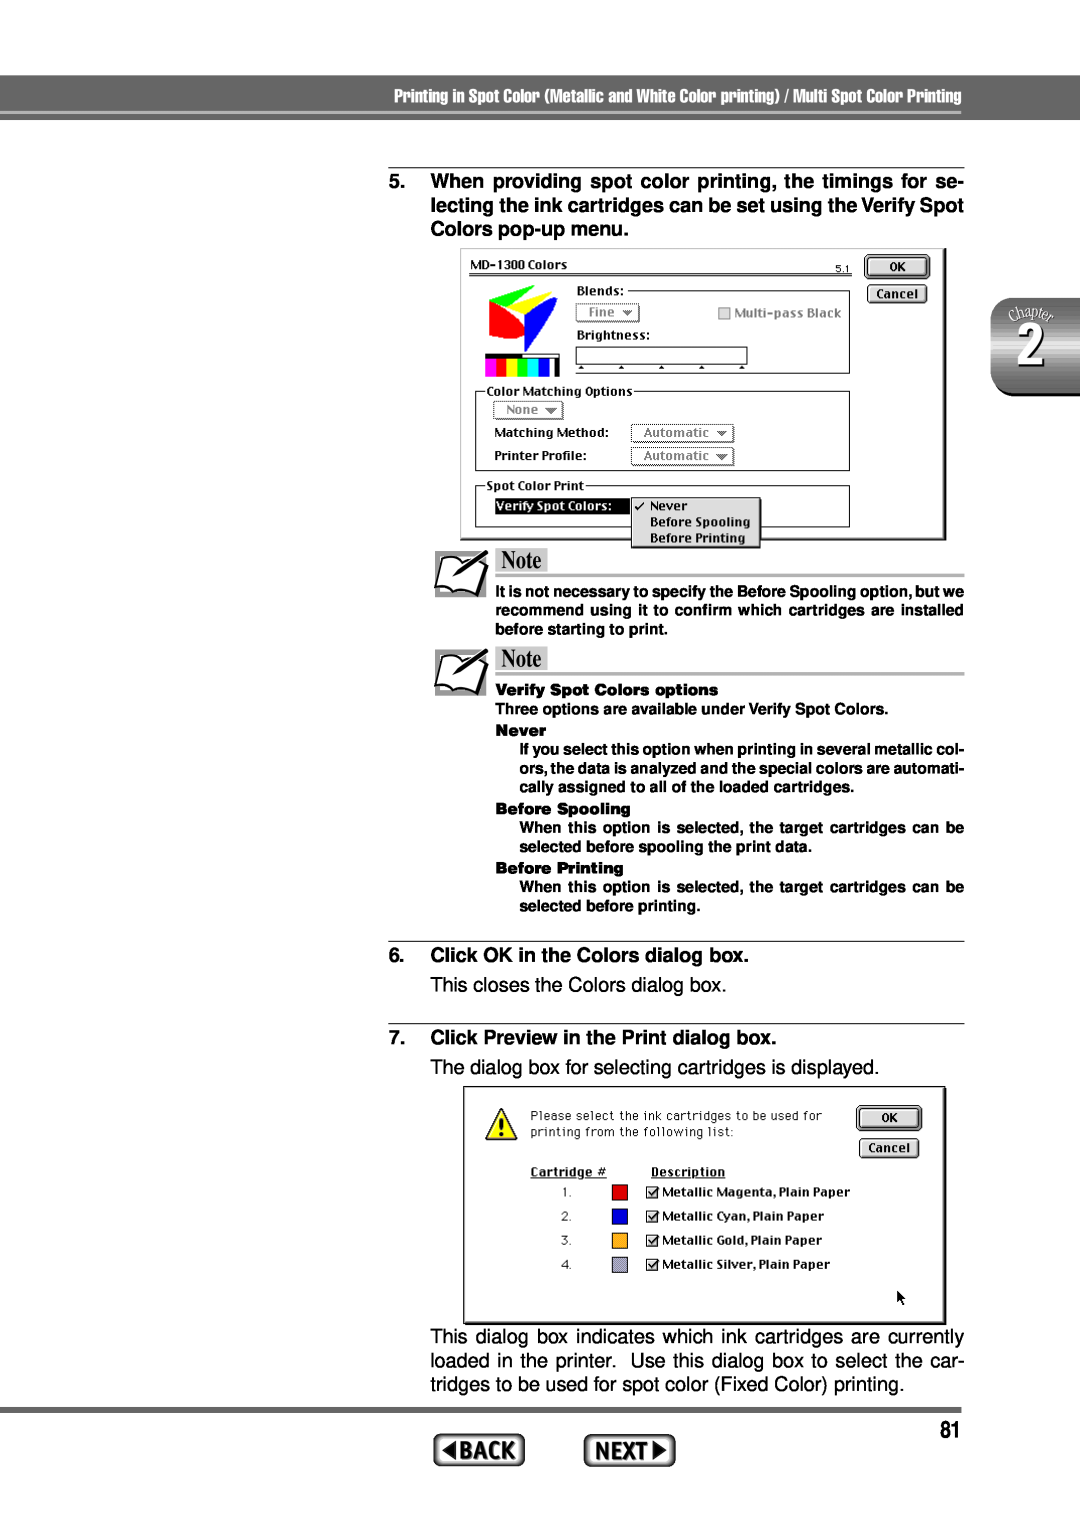 Alps Electric MD-1300 manual Click Preview in the Print dialog box, The dialog box for selecting cartridges is displayed 